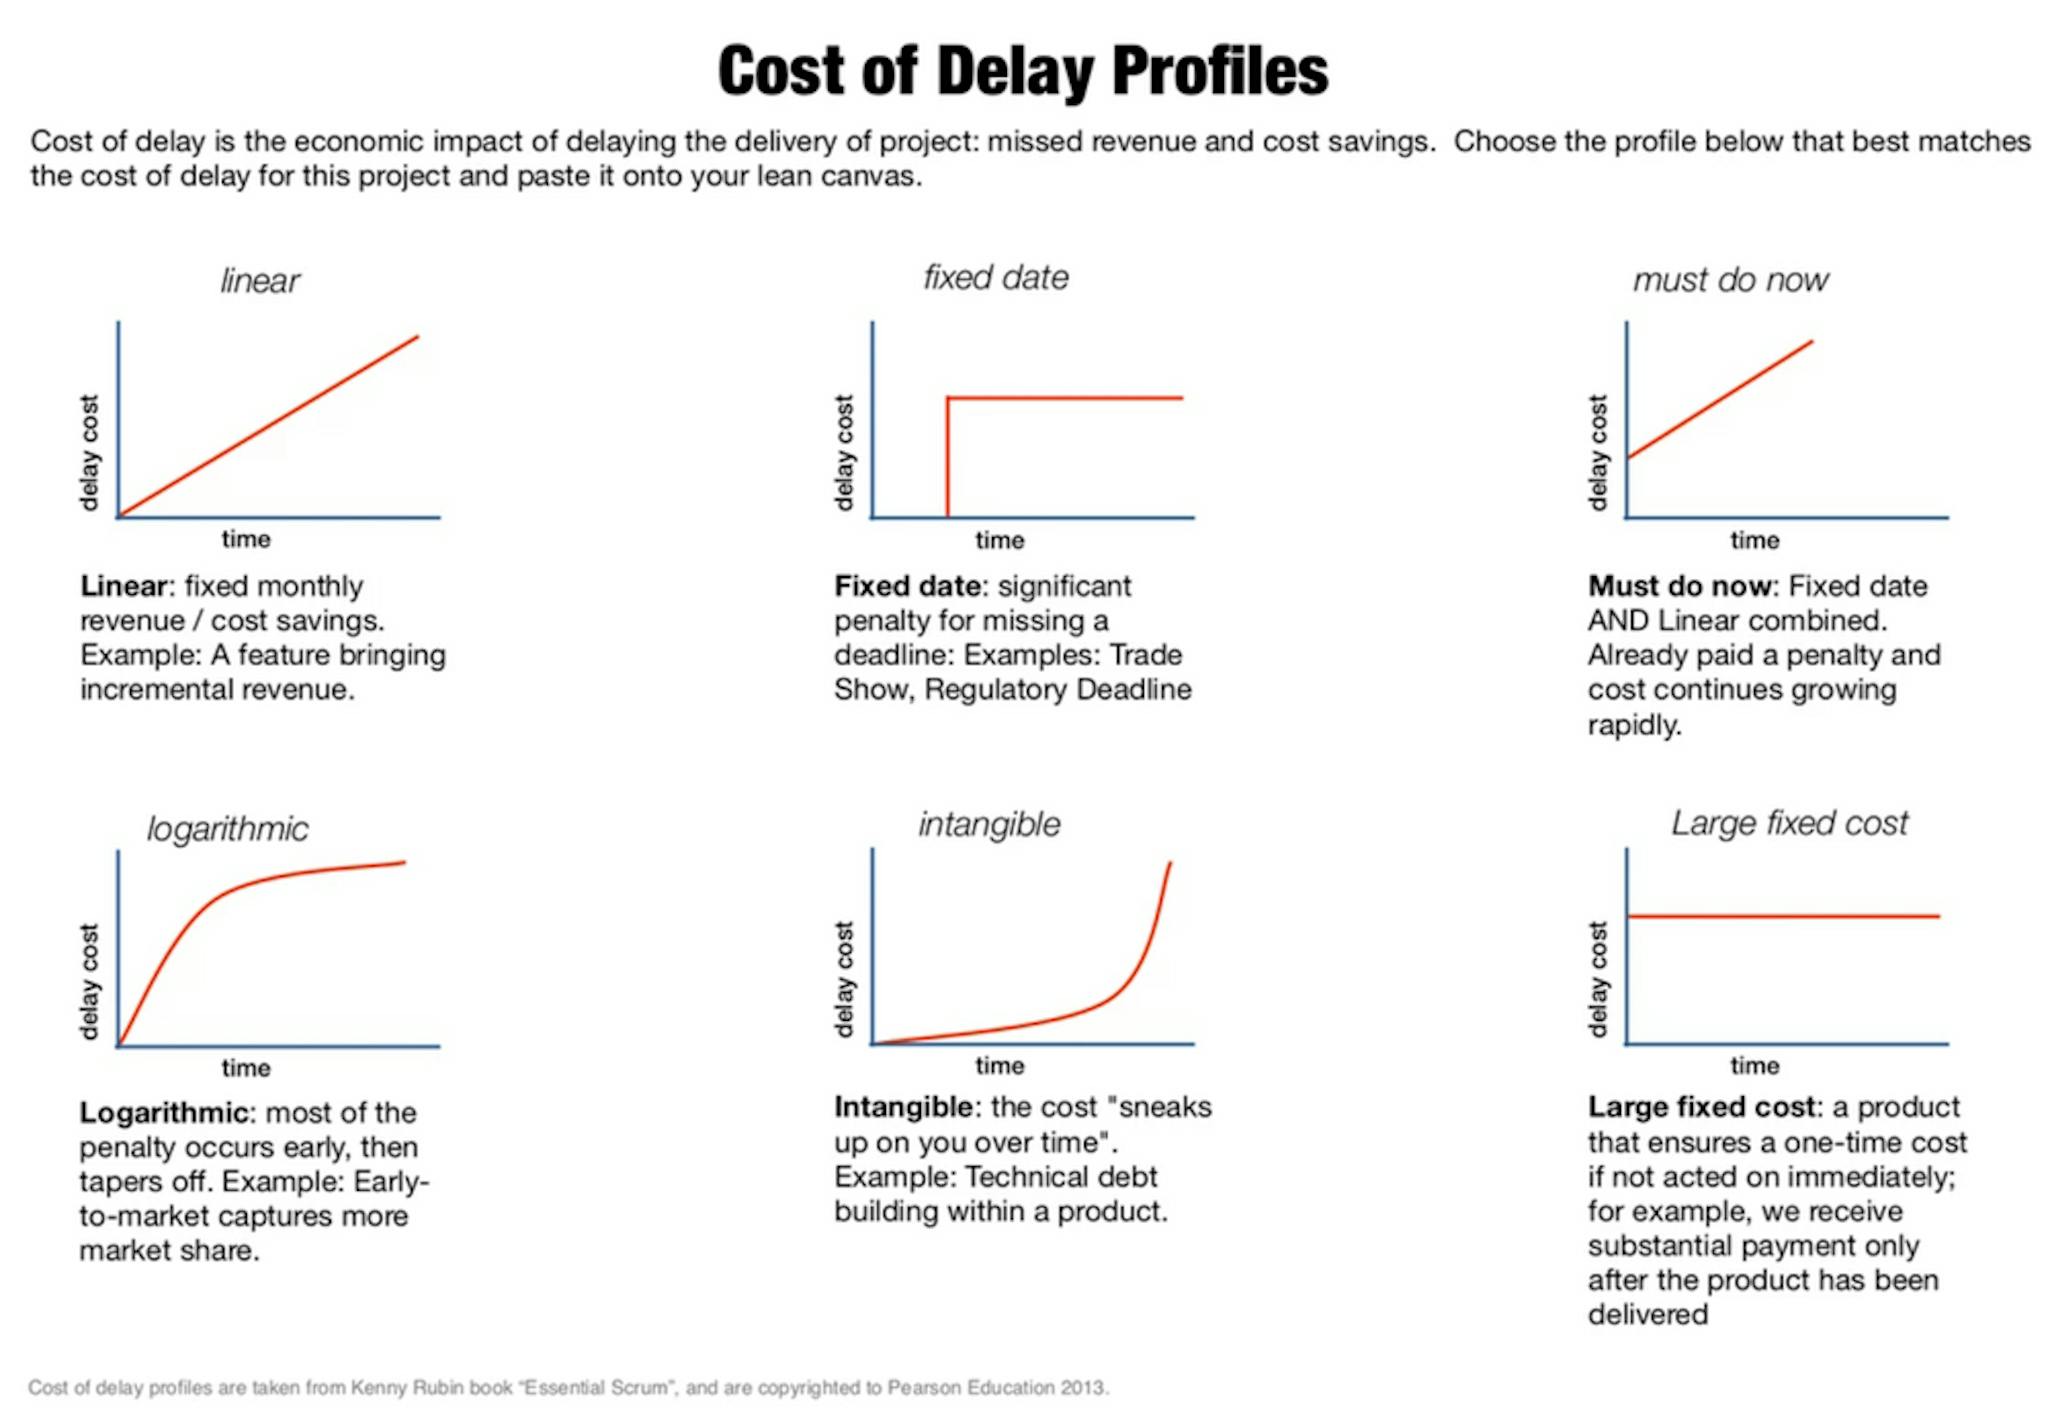 Your judgment on the cost of delay profile for an issue will inform your Impact rating during RICE scoring.